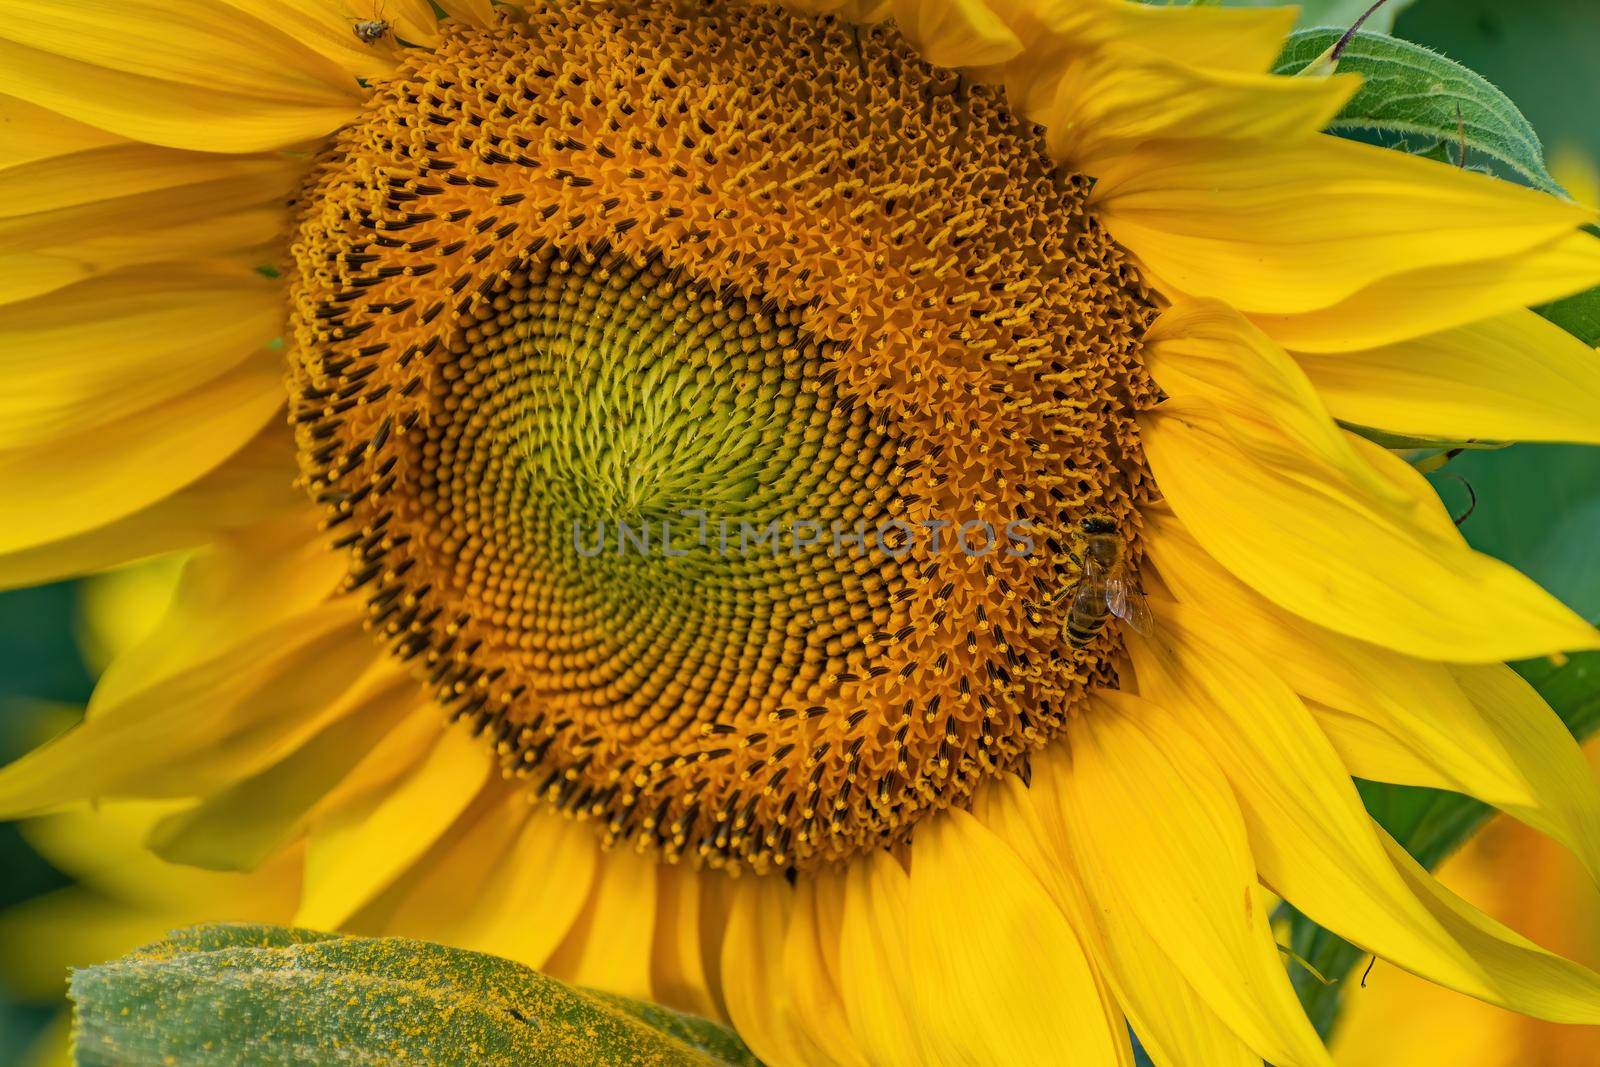 Texture, background for further work. Detail of a sunflower flower with a bee